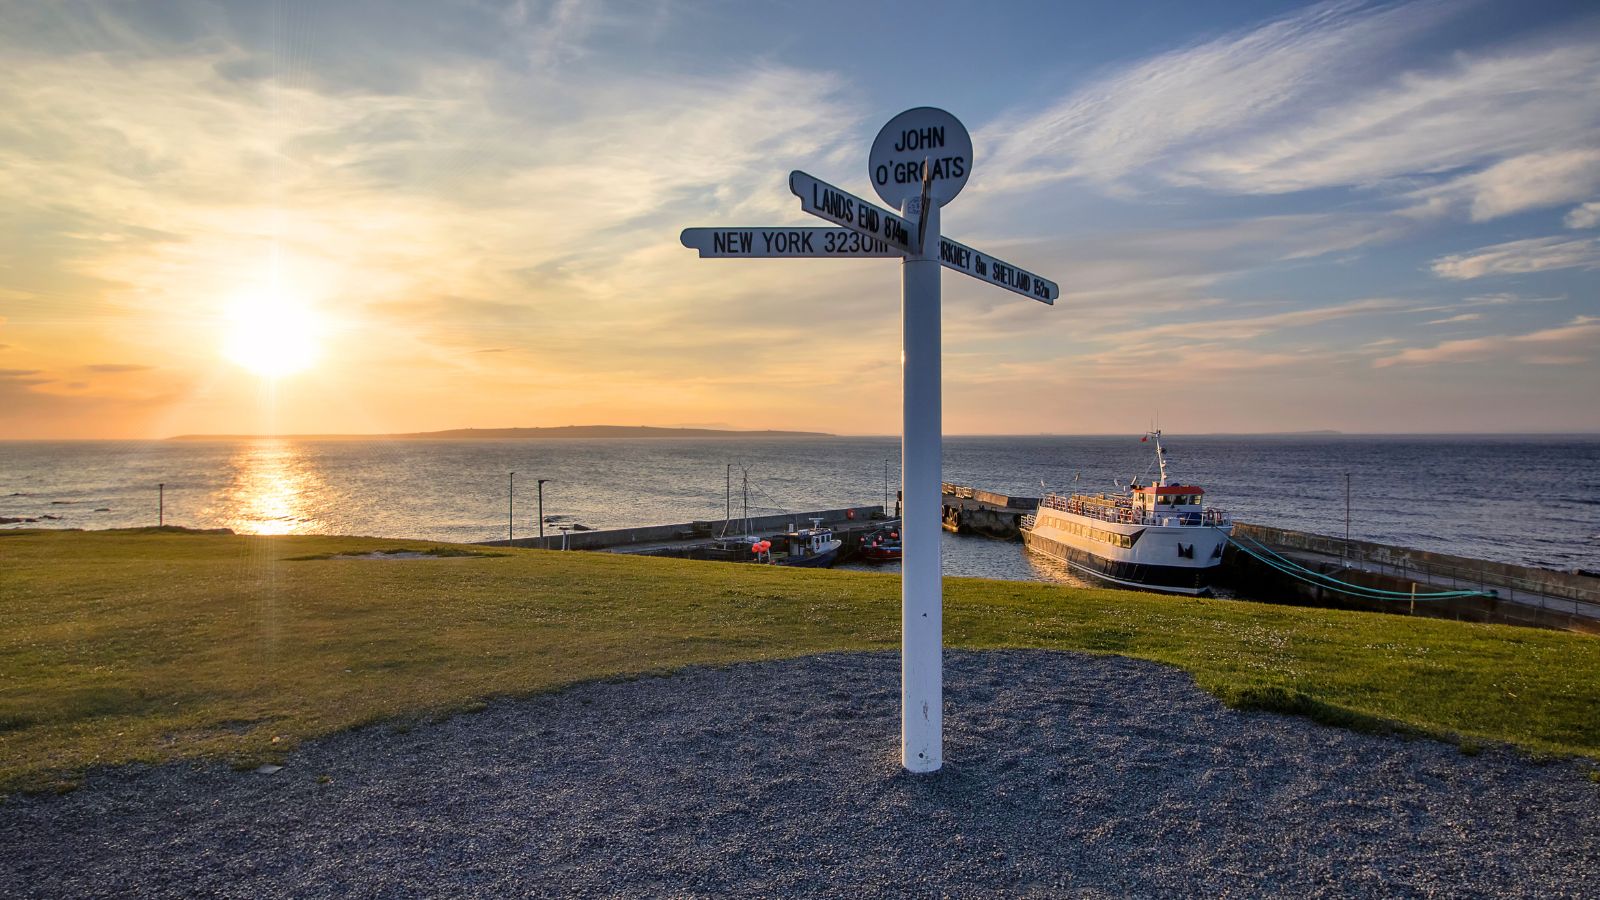 <p>Located at the northern tip of Scotland, John O’Groats is one of the UK’s remotest places. There’s not much to do other than get outside and enjoy the scenery! But, if you’re going to the highlands, it’s worth visiting – even if it’s just to say you’ve been.</p><p>There’s no doubting its beauty, either. The air is fresh, cliffs drop into the North Sea, and the Orkney Islands sit on the horizon. Go for a walk, grab a beer, look for the orcas that swim off the coast here, and enjoy another unique thing to do in Scotland.</p>